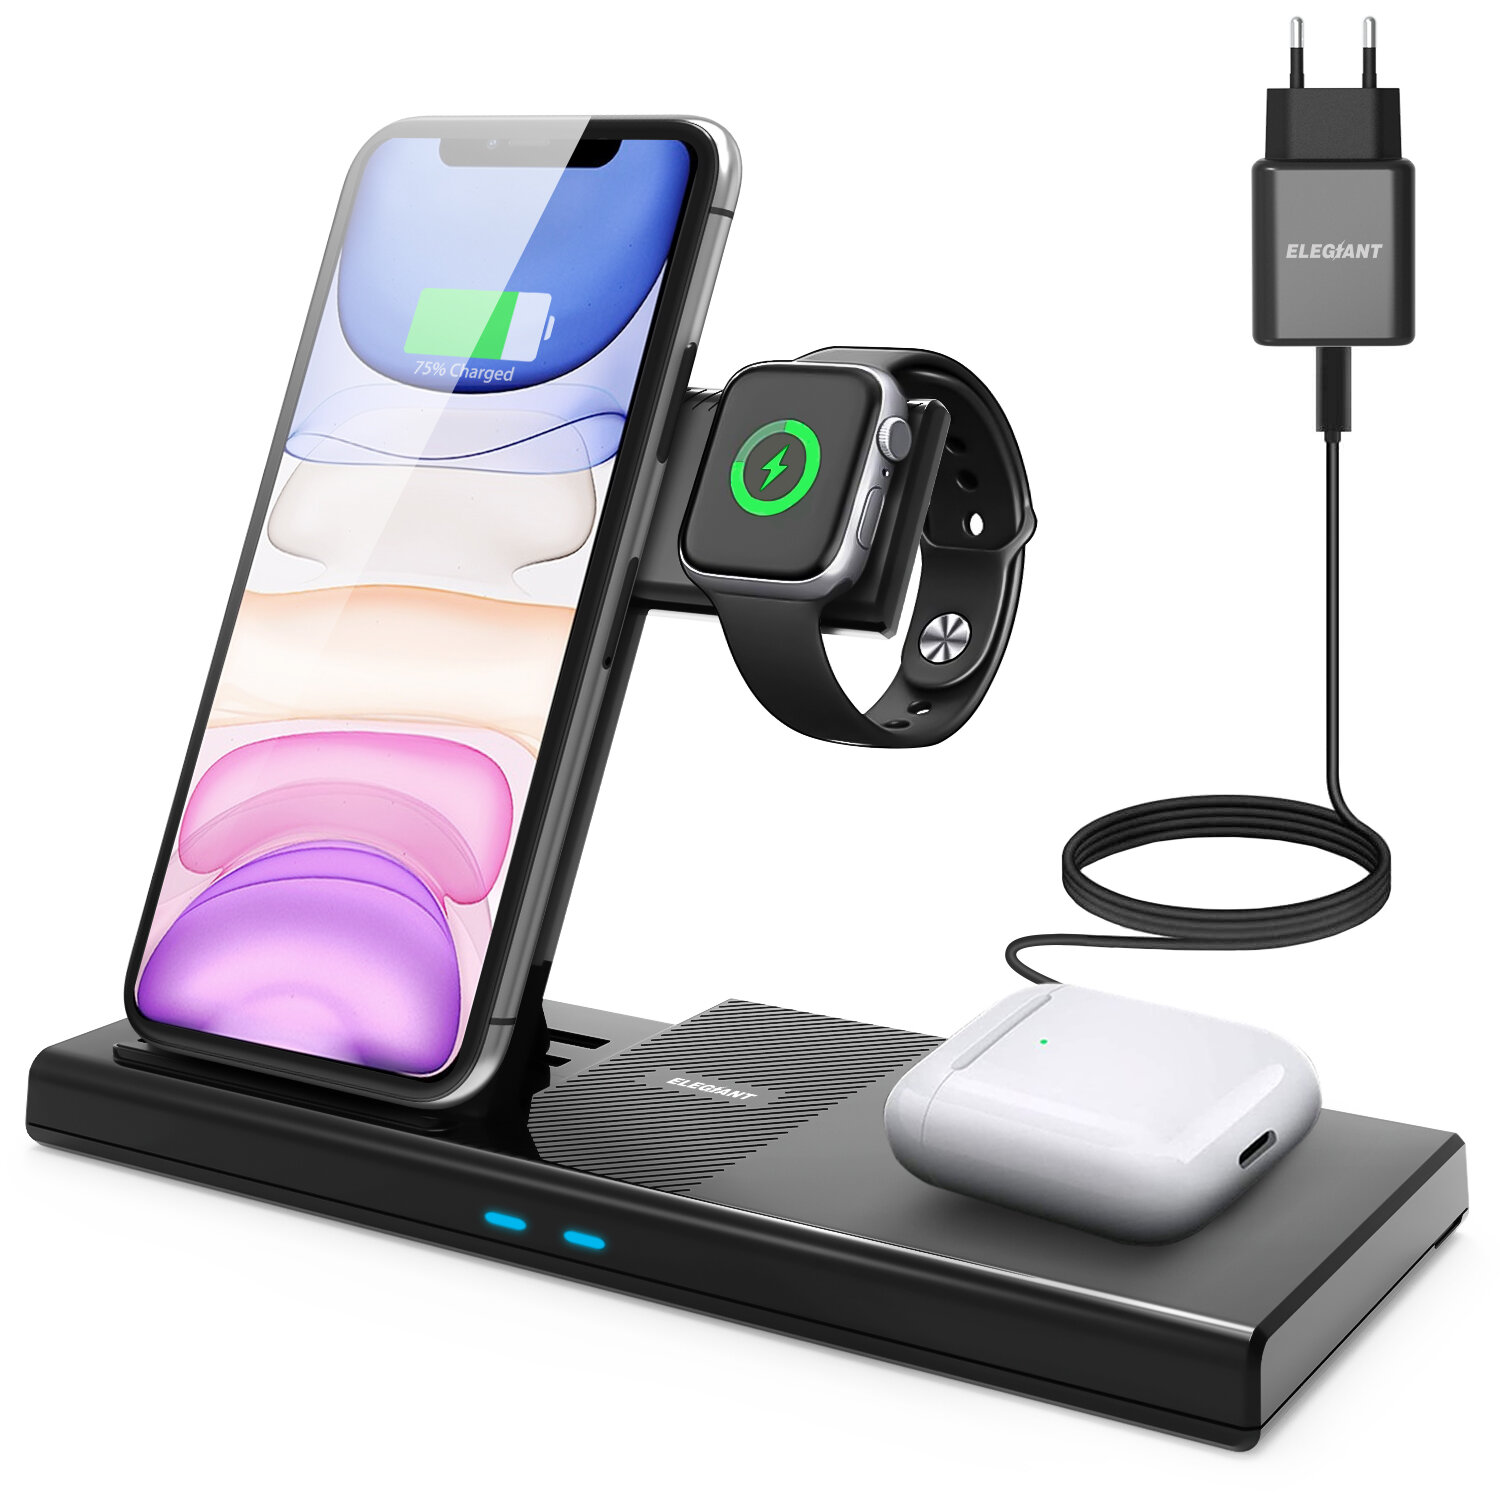 ELEGIANT U7 10W 7.5W 5W Wireless Charger Fast Wireless Charging Stand For Qi-enabled Smart Phones for TWS Earphones for Smart Watch for iPhone 12 Pro Max for Huawei Mate40 OnePlus 8 Pro